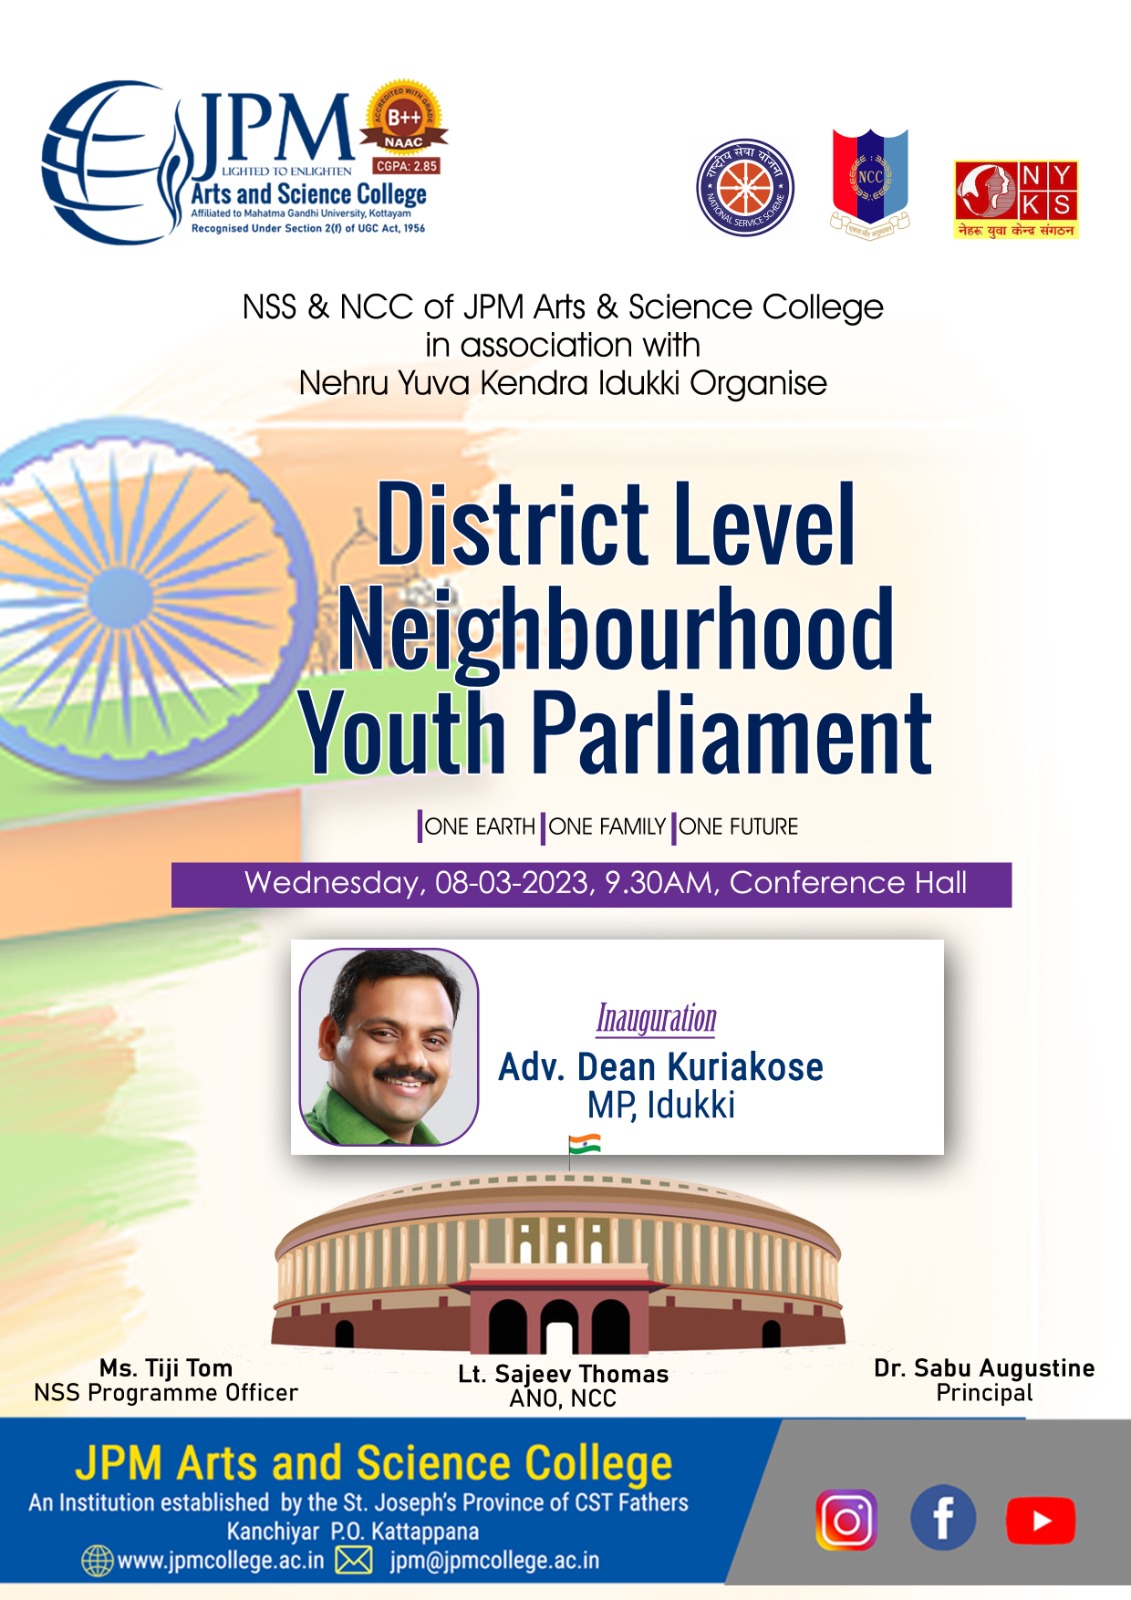 District Level Neighborhood Youth Parliament